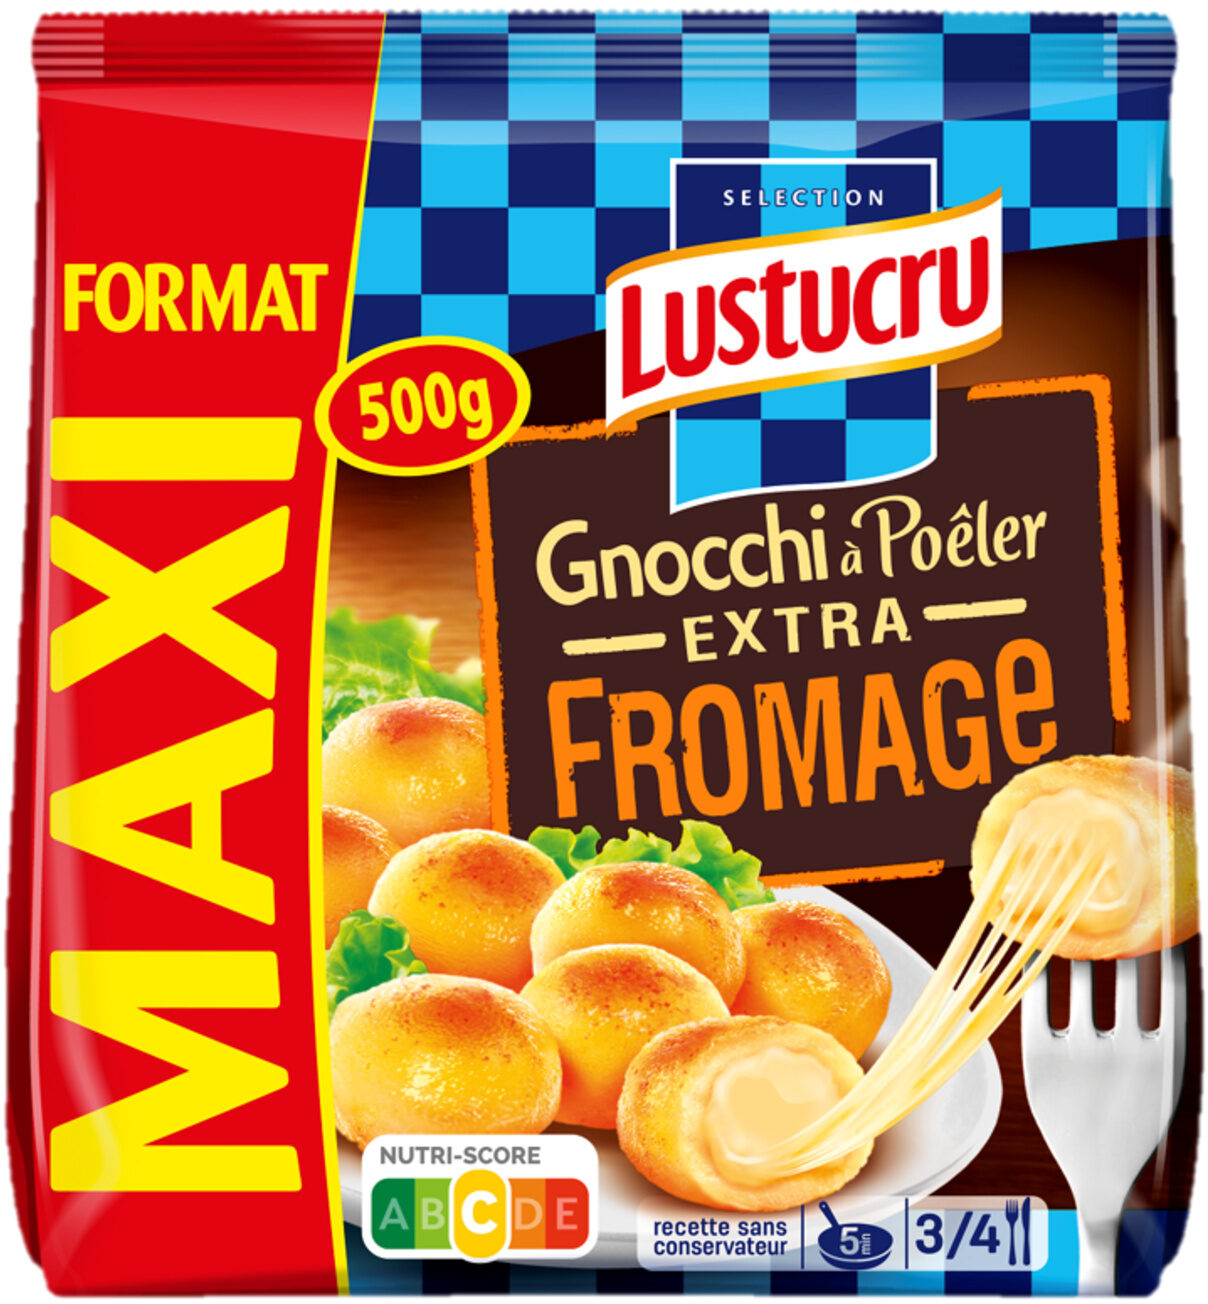 Lustucru gnocchi a poeler extra fromage maxi 500g - Product - fr